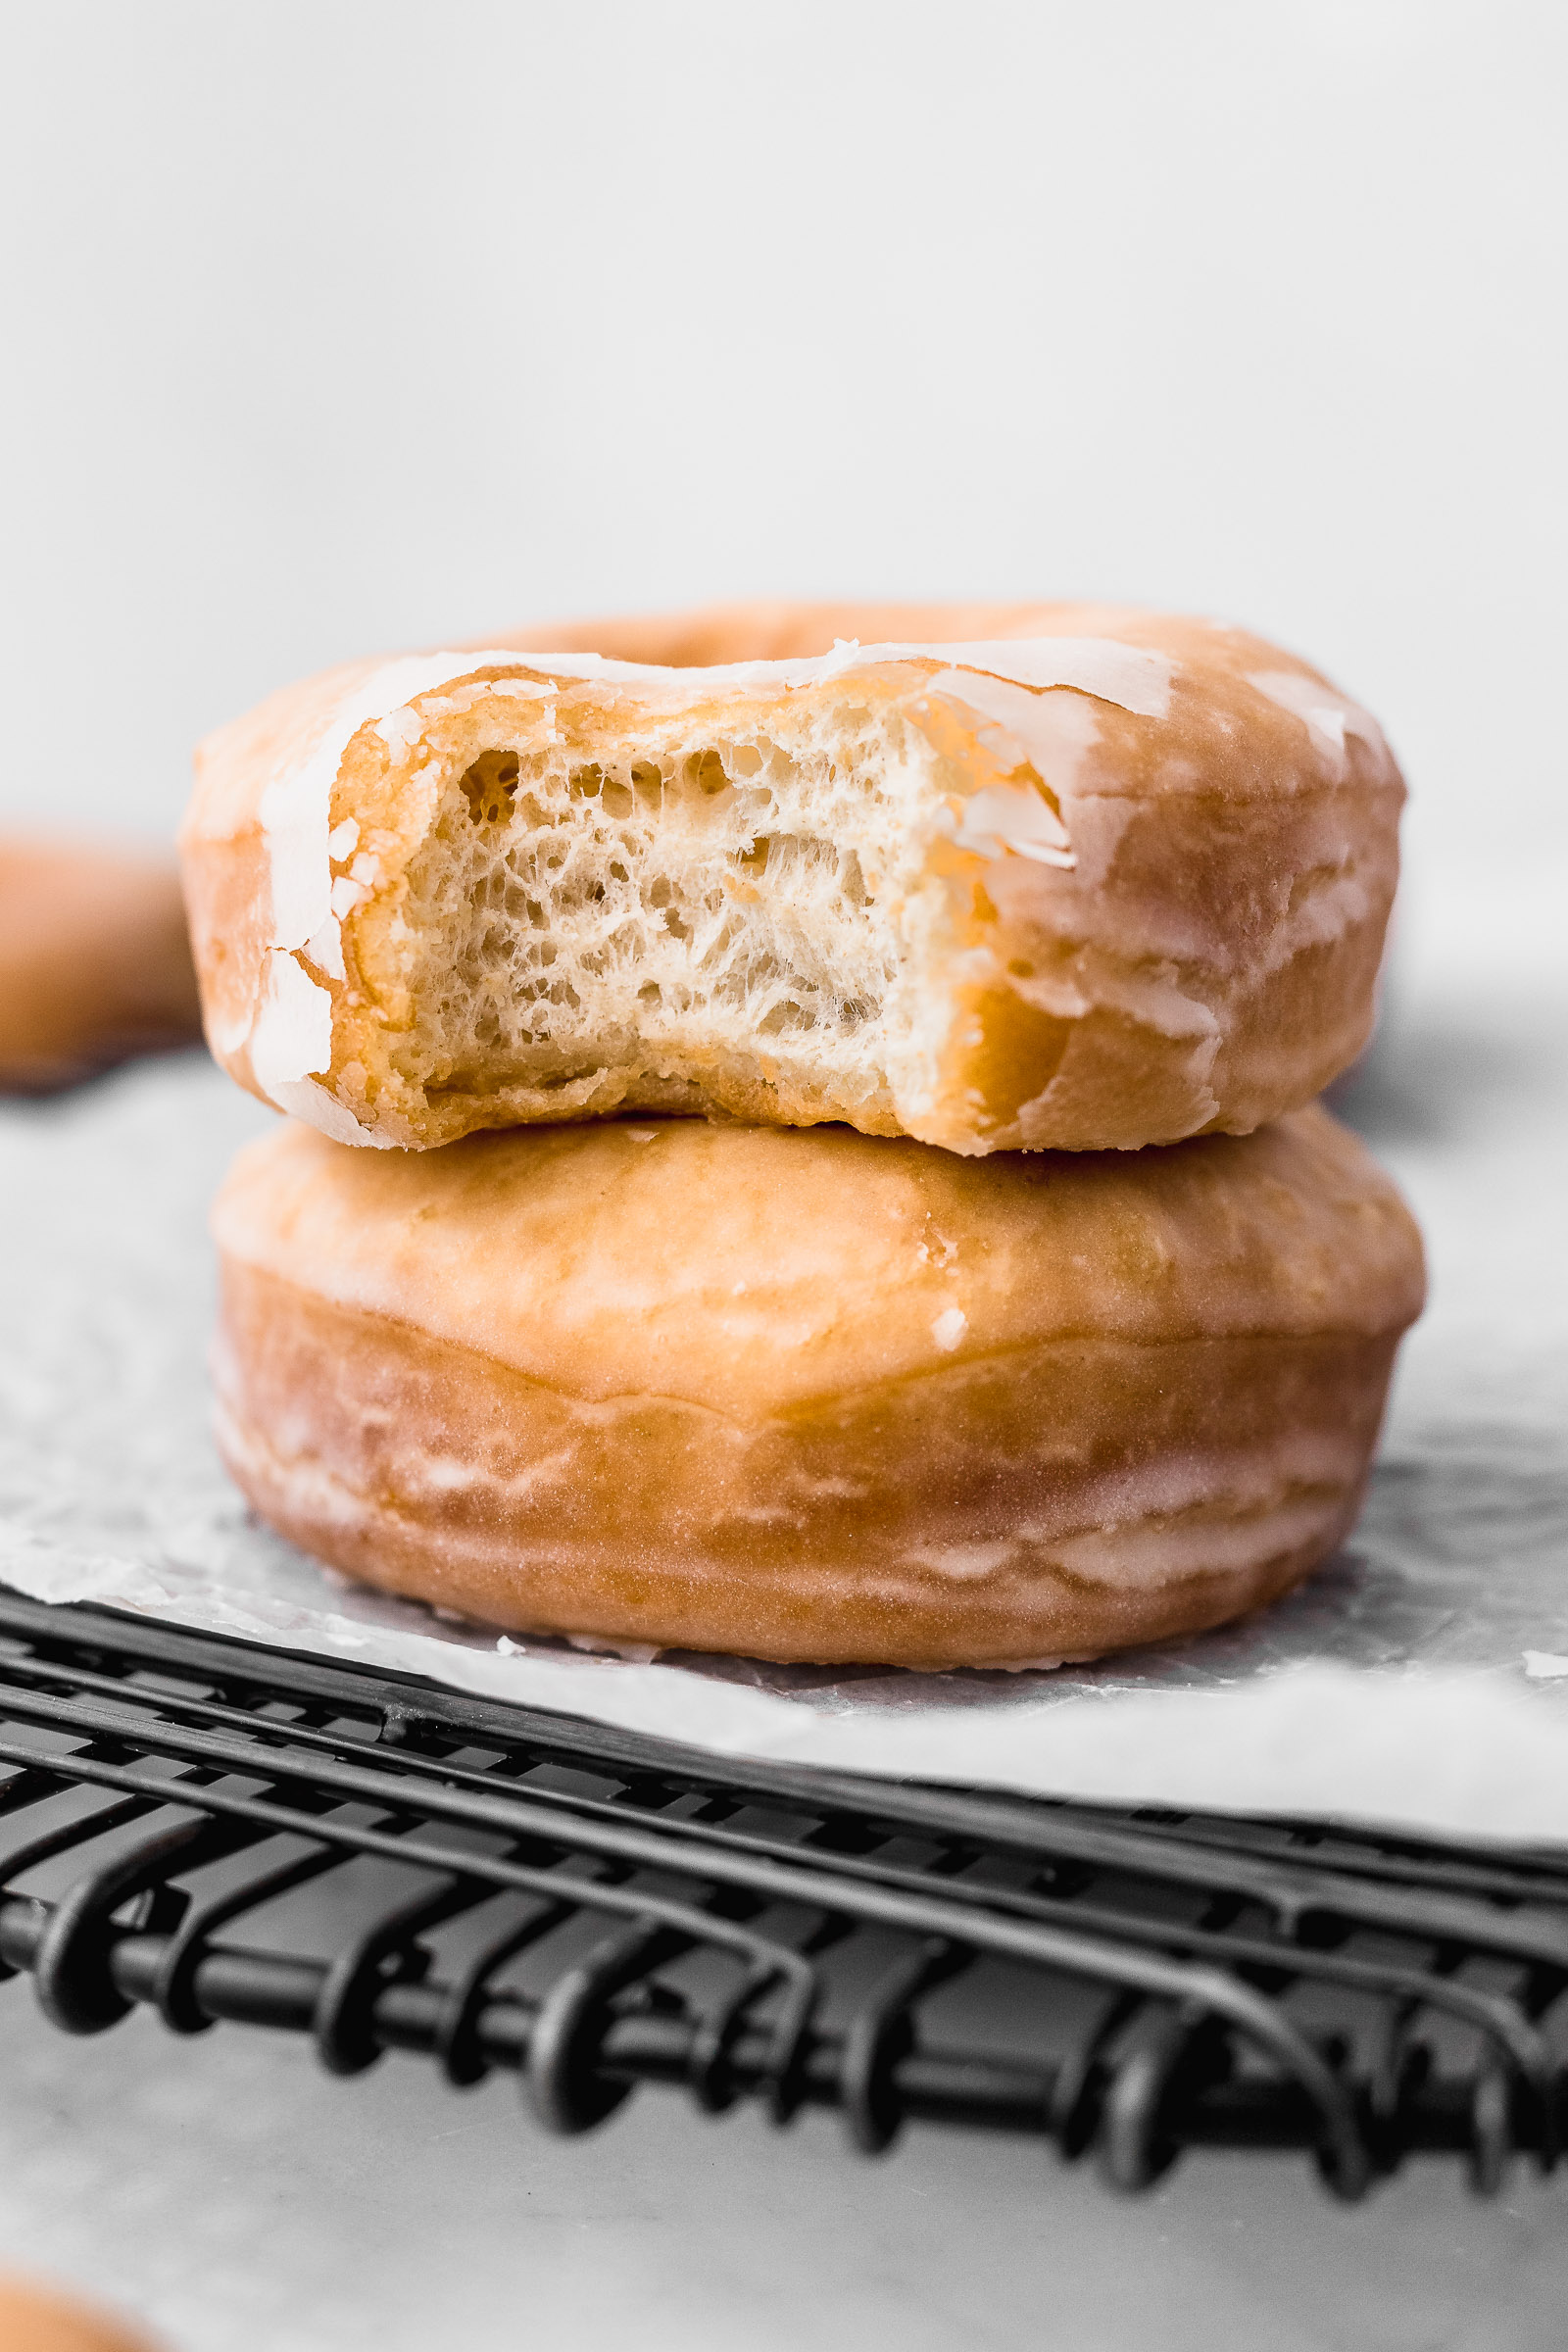 Closeup of a round glazed donuts with a shiny sugar exterior. A bite has been taken off and you can see the glaze breaking and the fluffy interior.